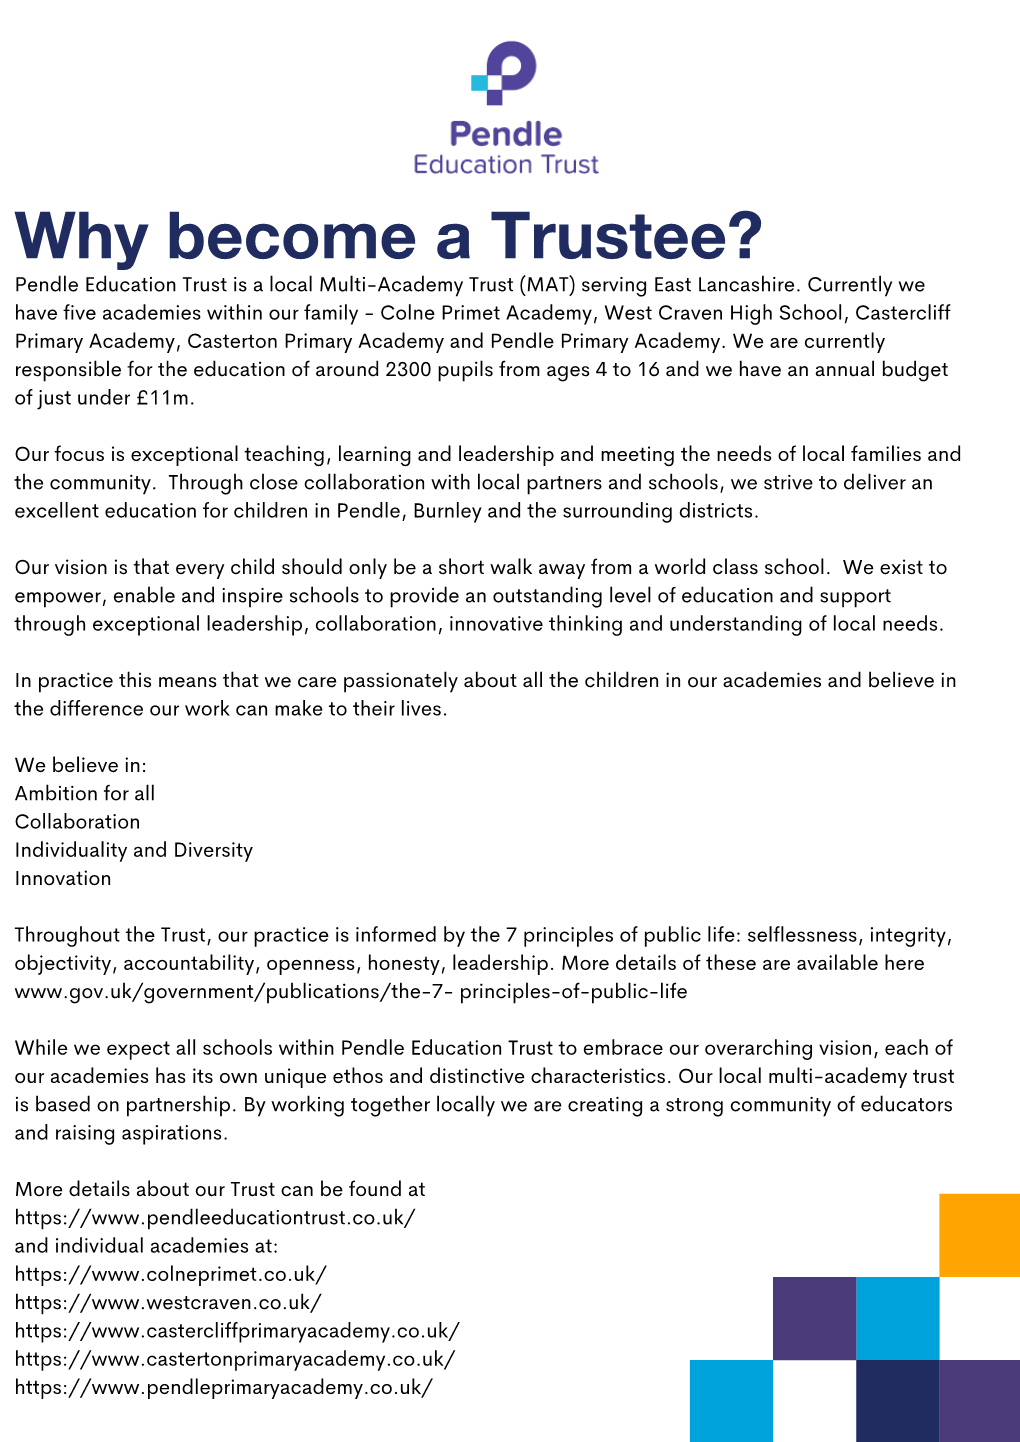 Why Become a Trustee? Pendle Education Trust Is a Local Multi-Academy Trust (MAT) Serving East Lancashire